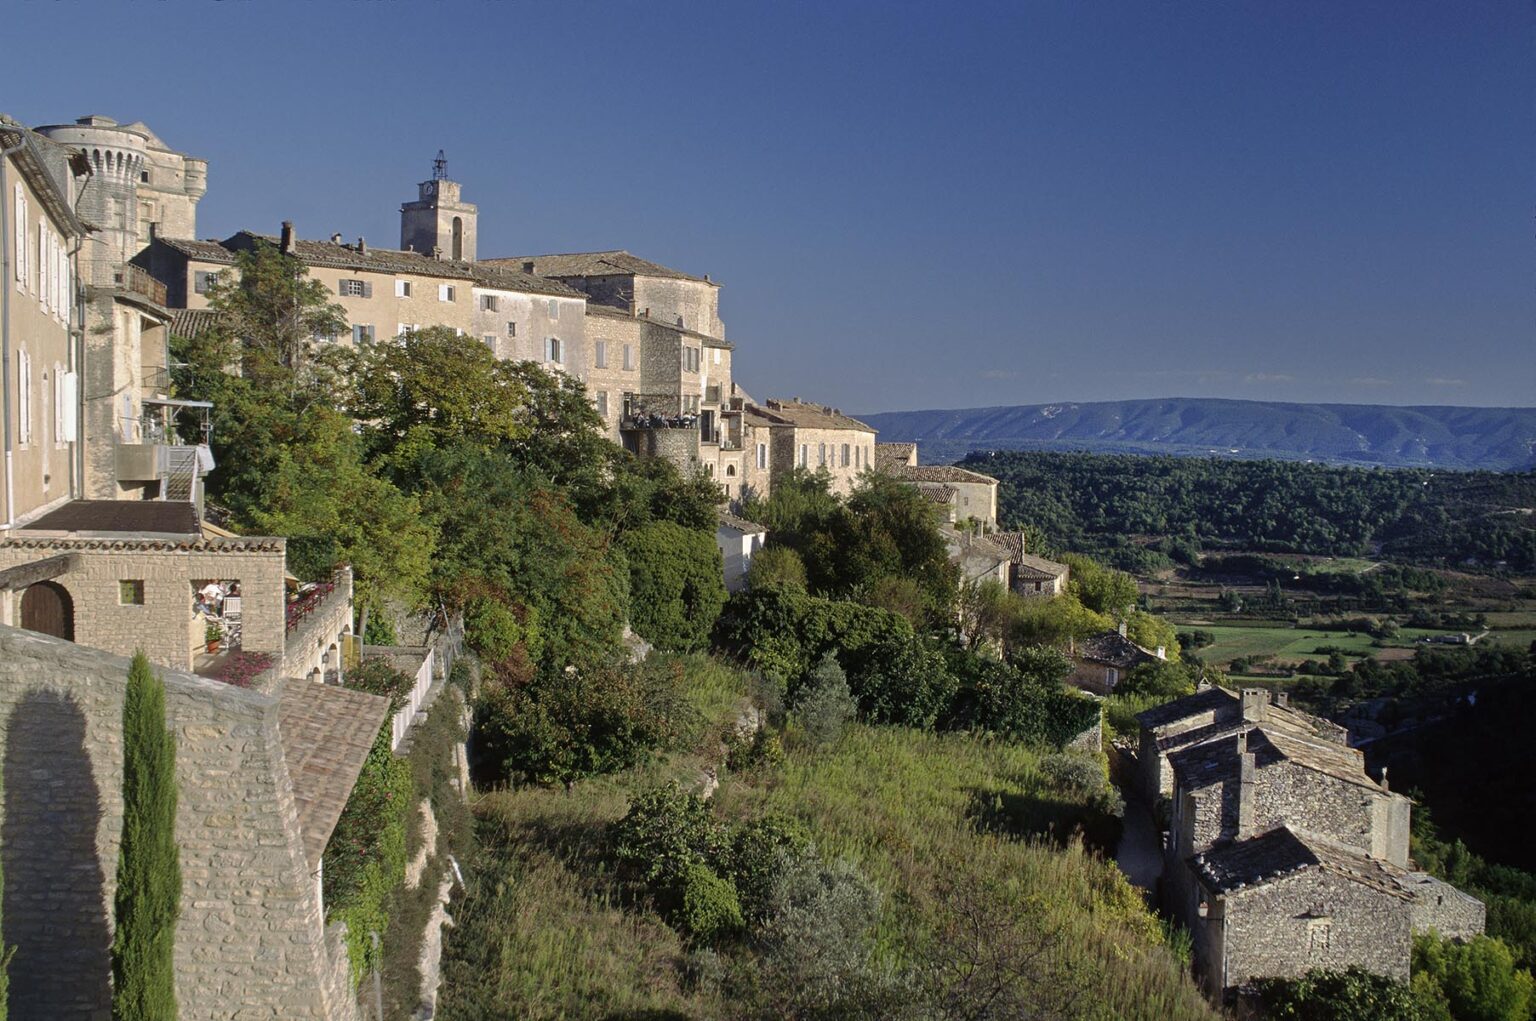 The village of GORDES sits dramatically on top of a hill - PROVENCE, FRANCE